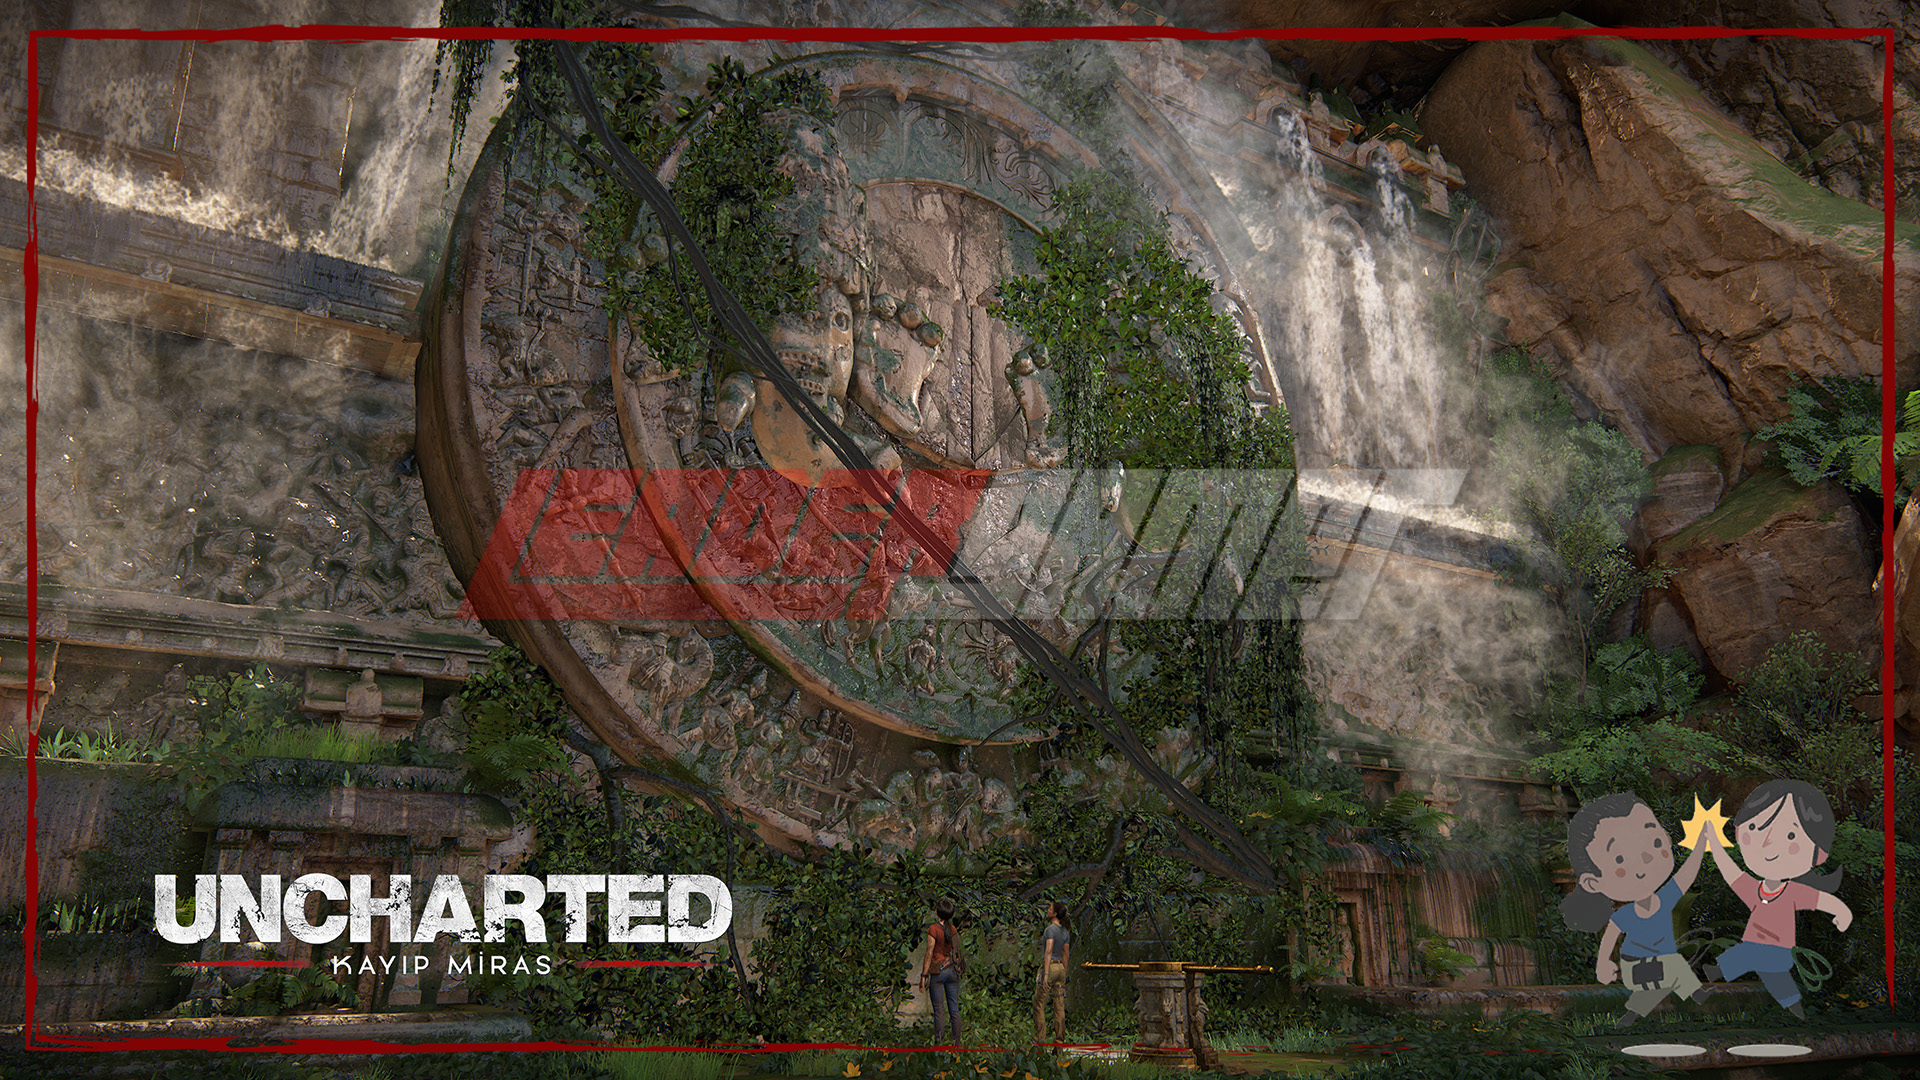 Uncharted 4 Uncharted: The Lost Legacy